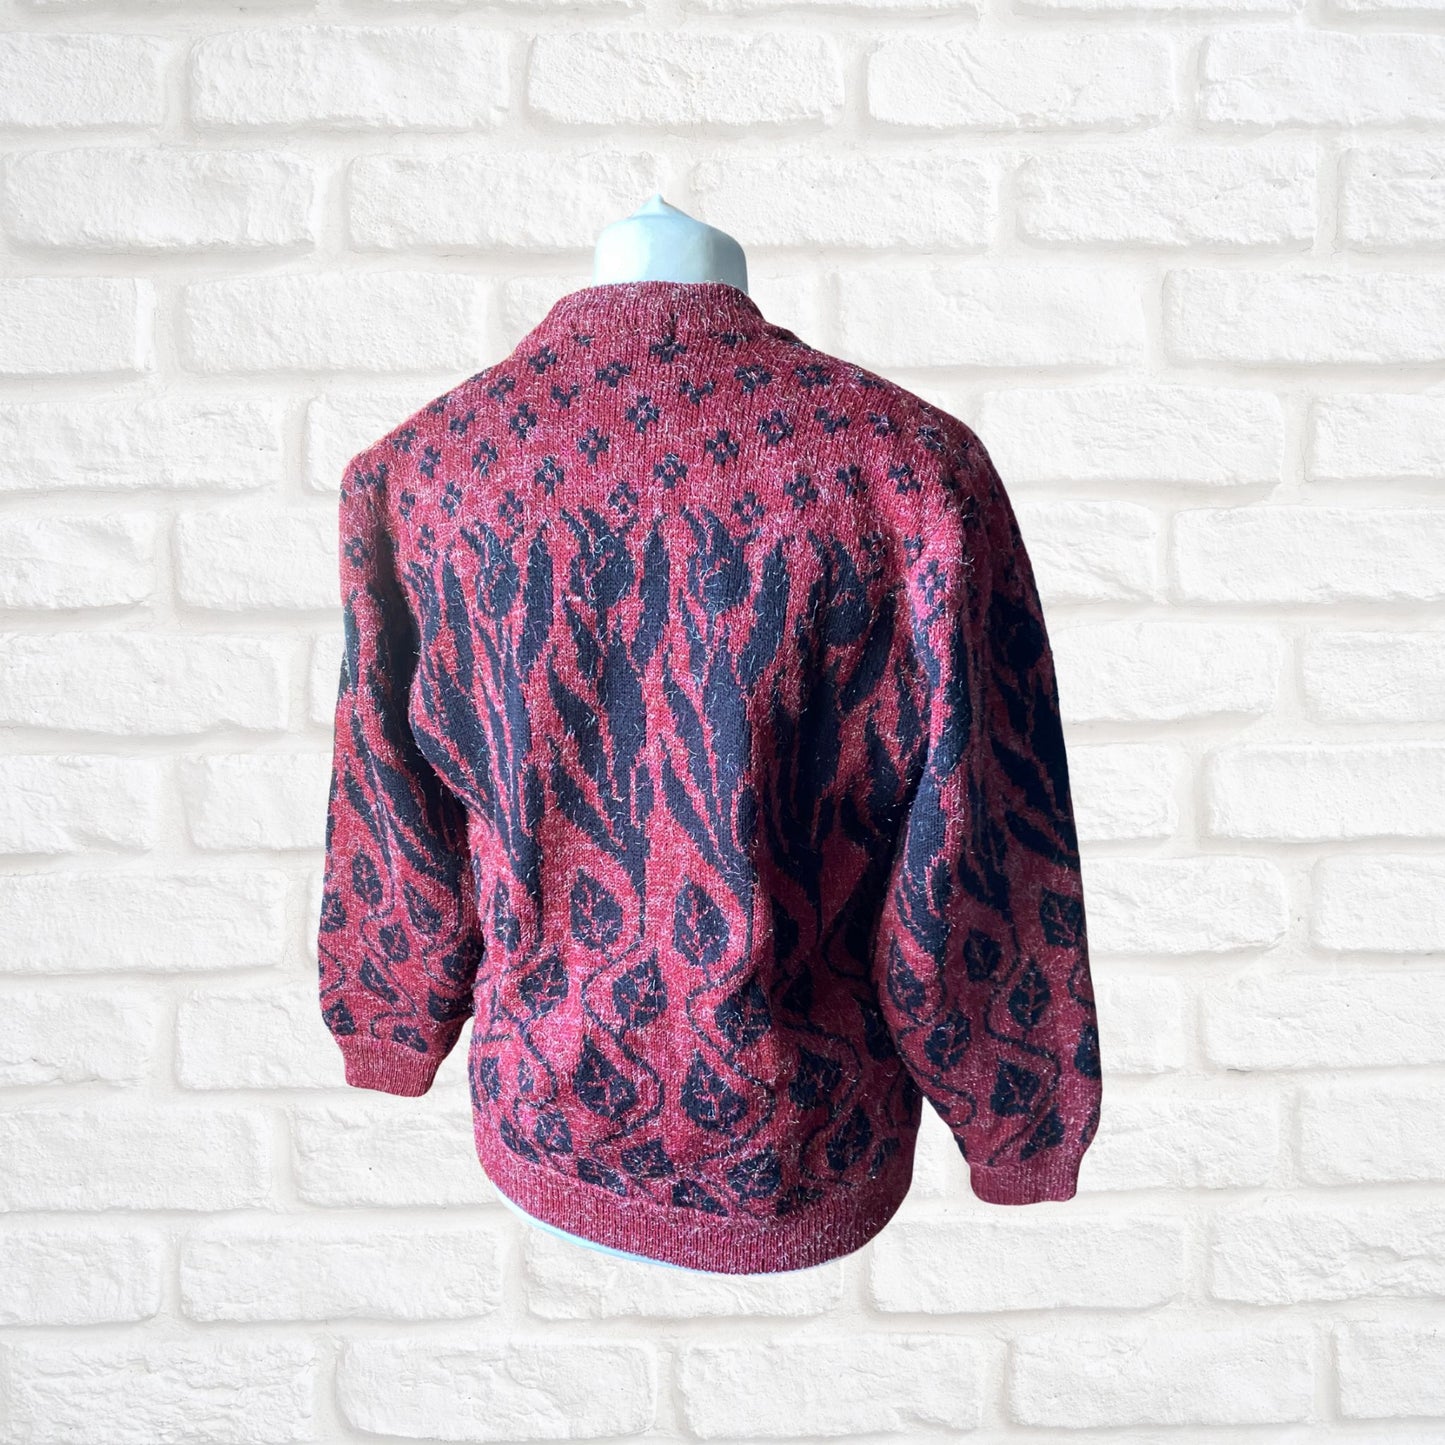 Vintage 80s Burgundy and Black Botanical Print Cardigan: Warm and Stylish Cover-Up. Approx UK size 14-18